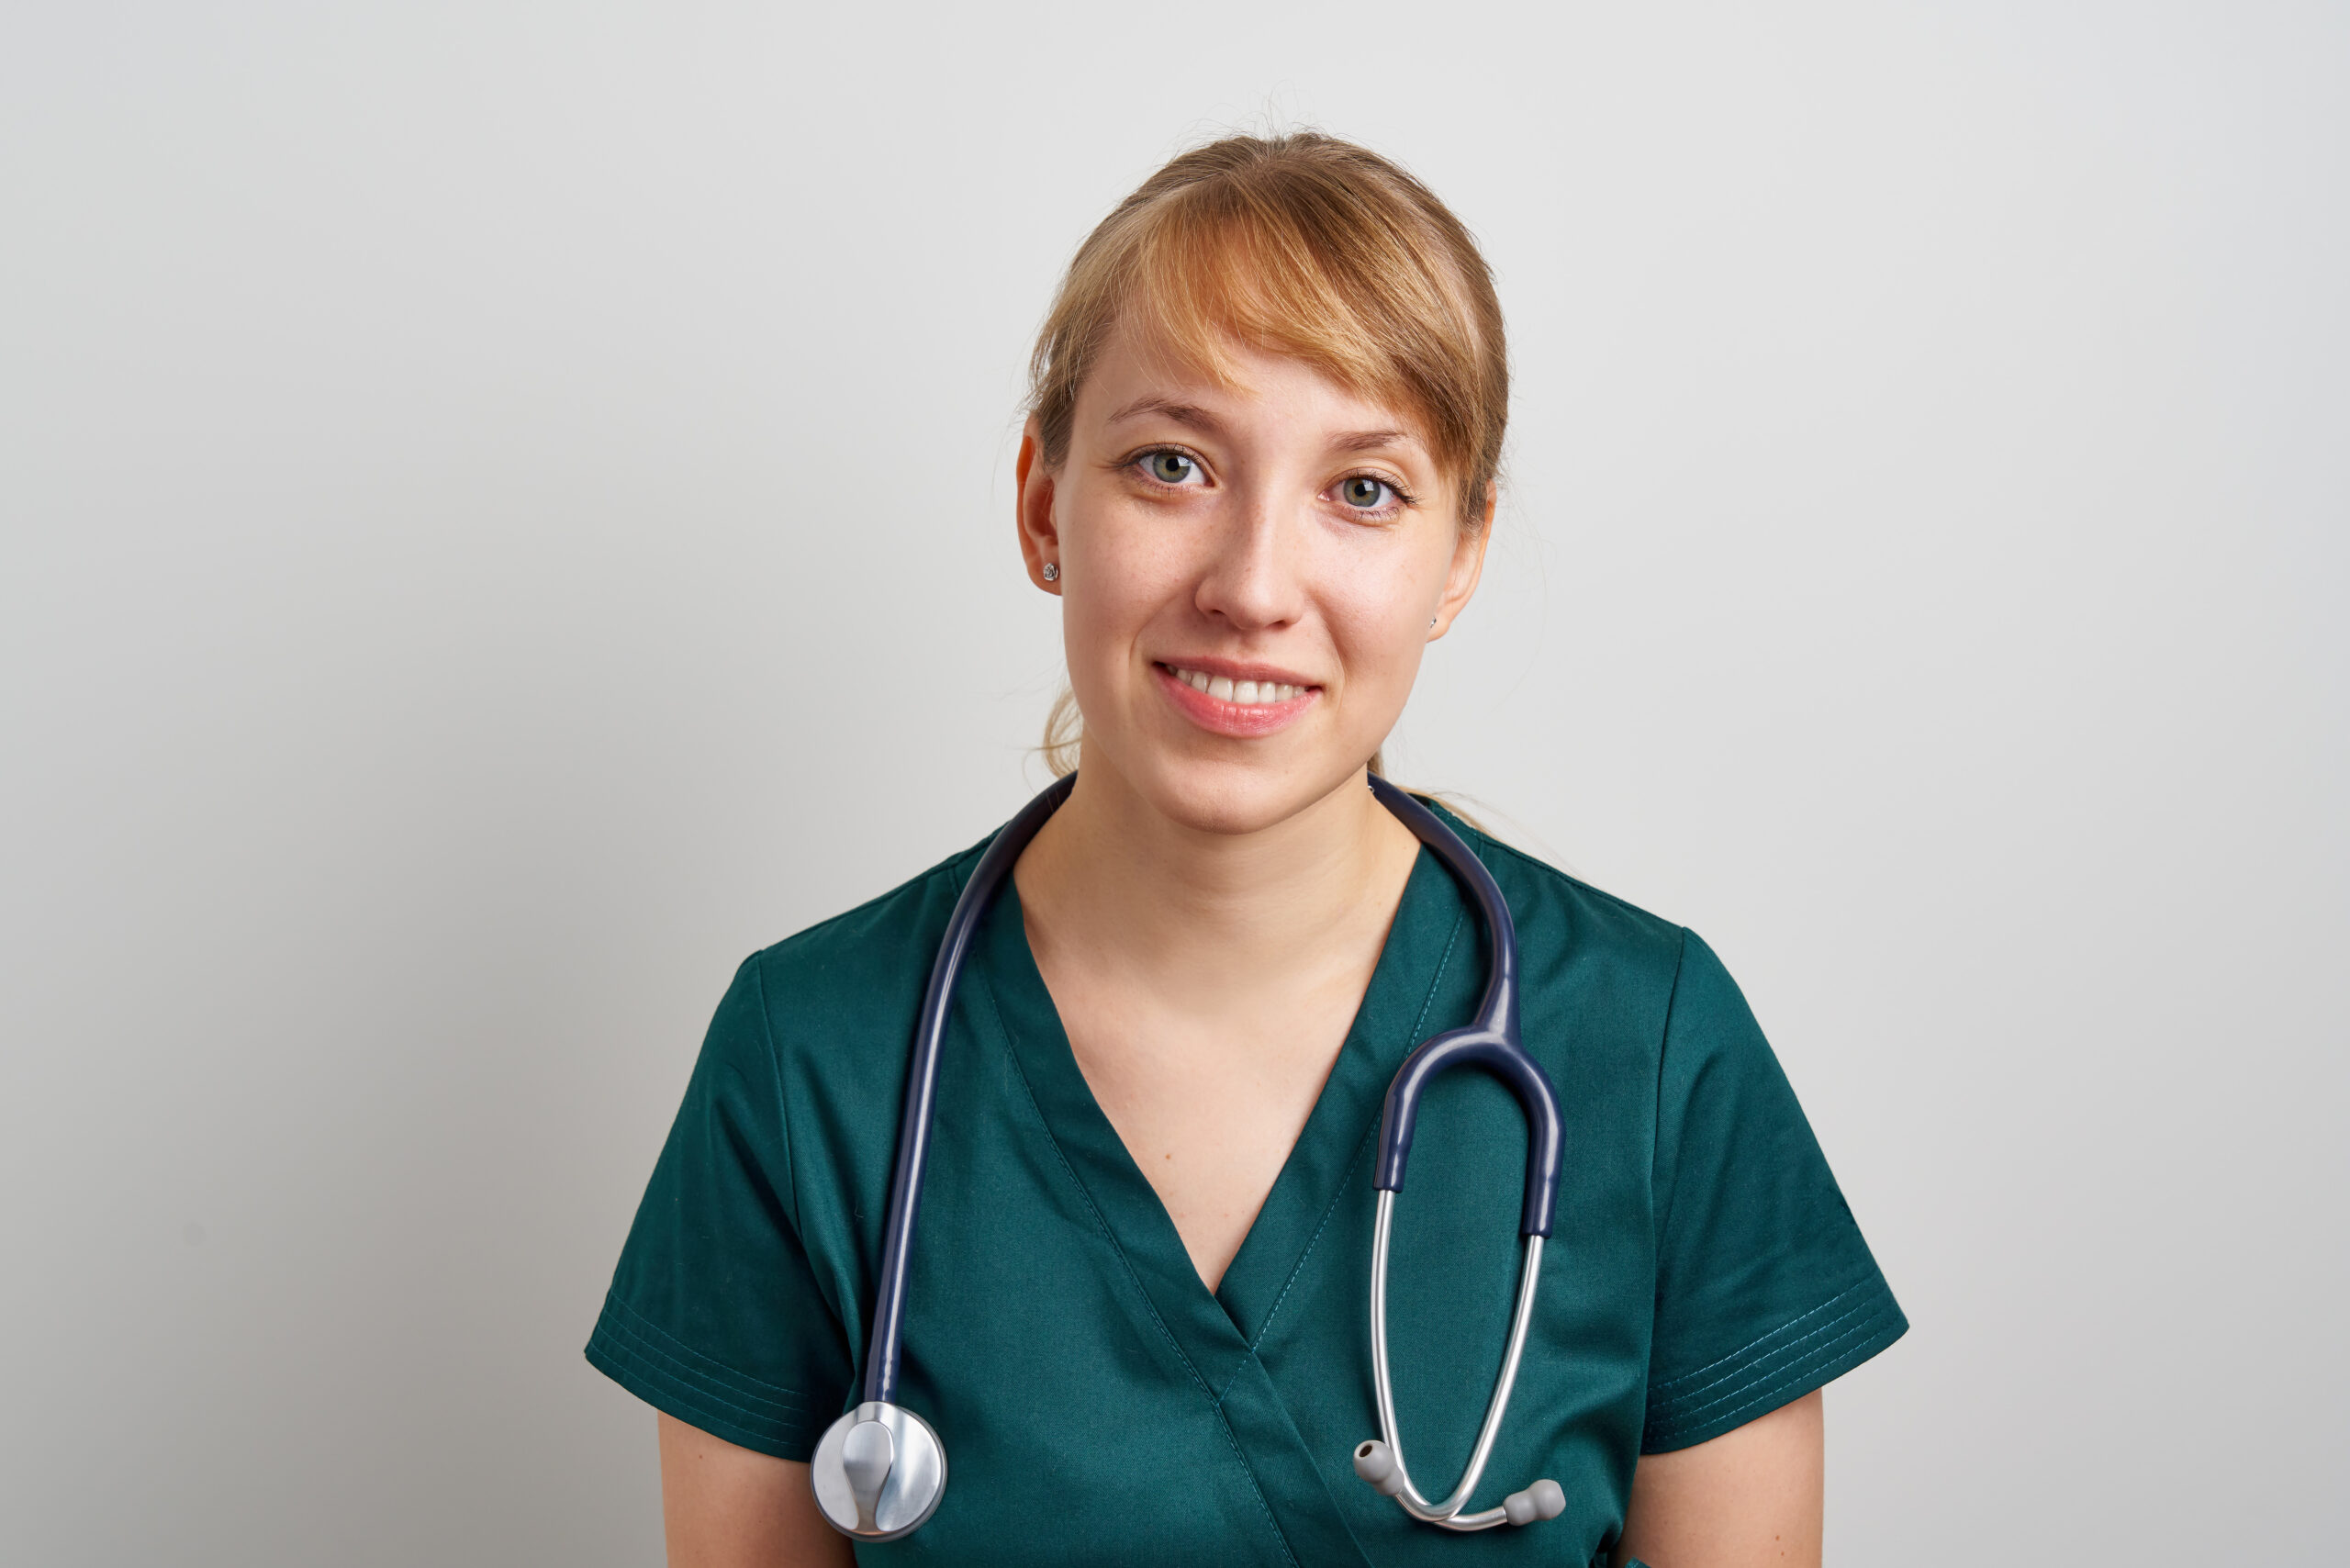 How to Become a Certified Nursing Assistant in Texas?